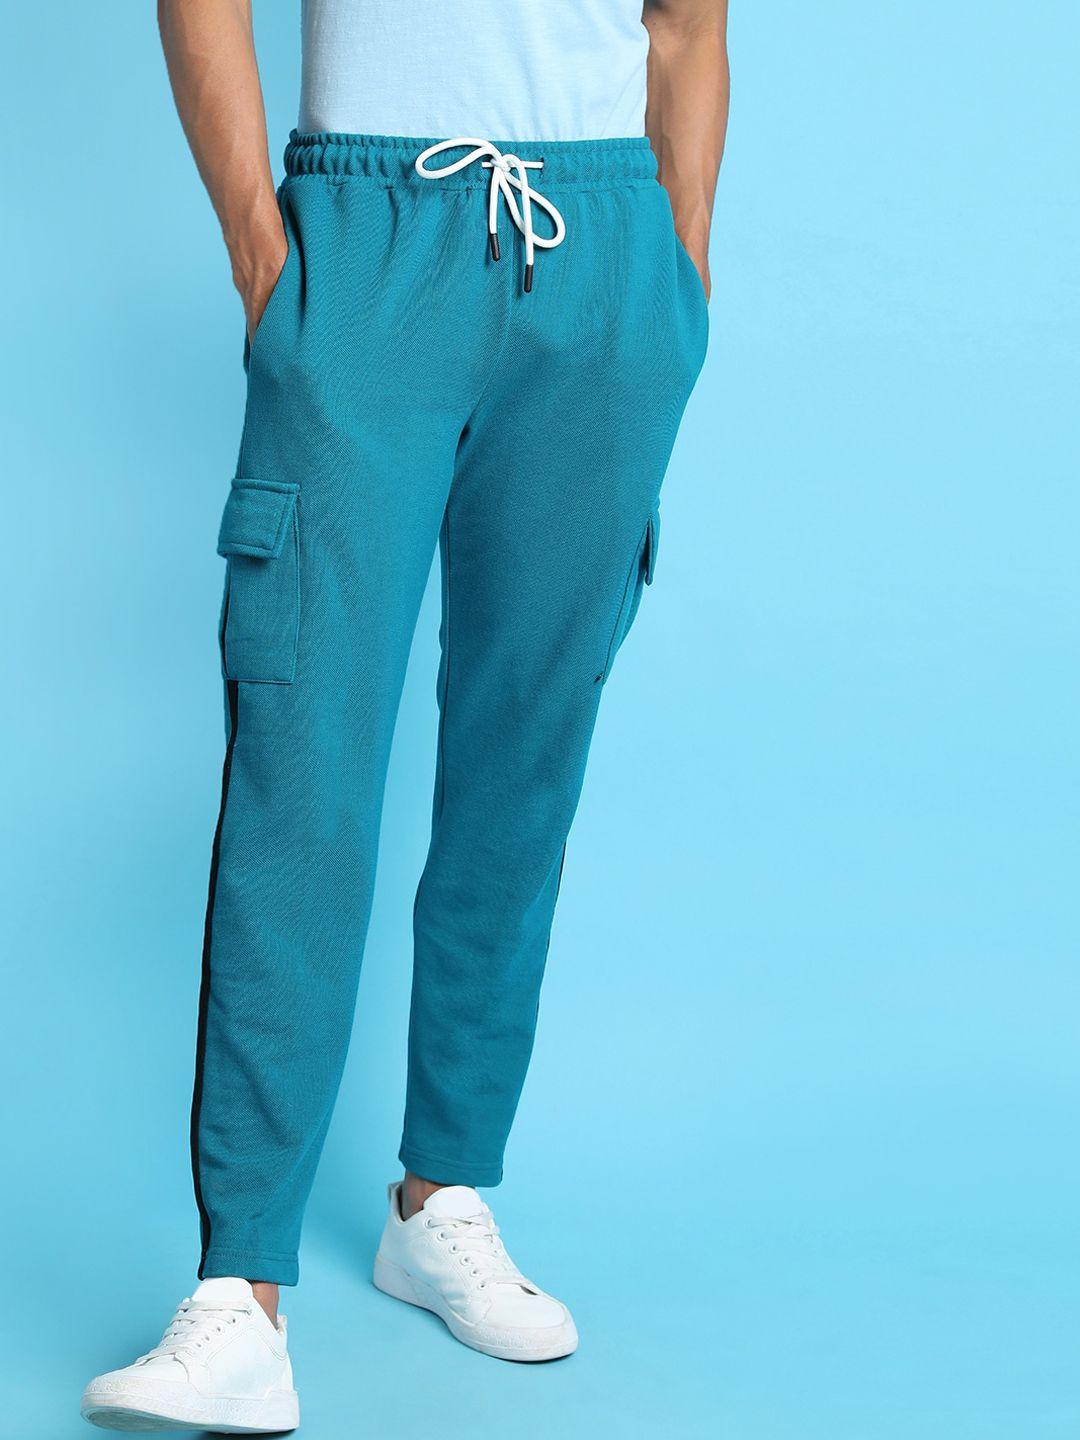 campus-sutra-men-teal-solid-track-pants